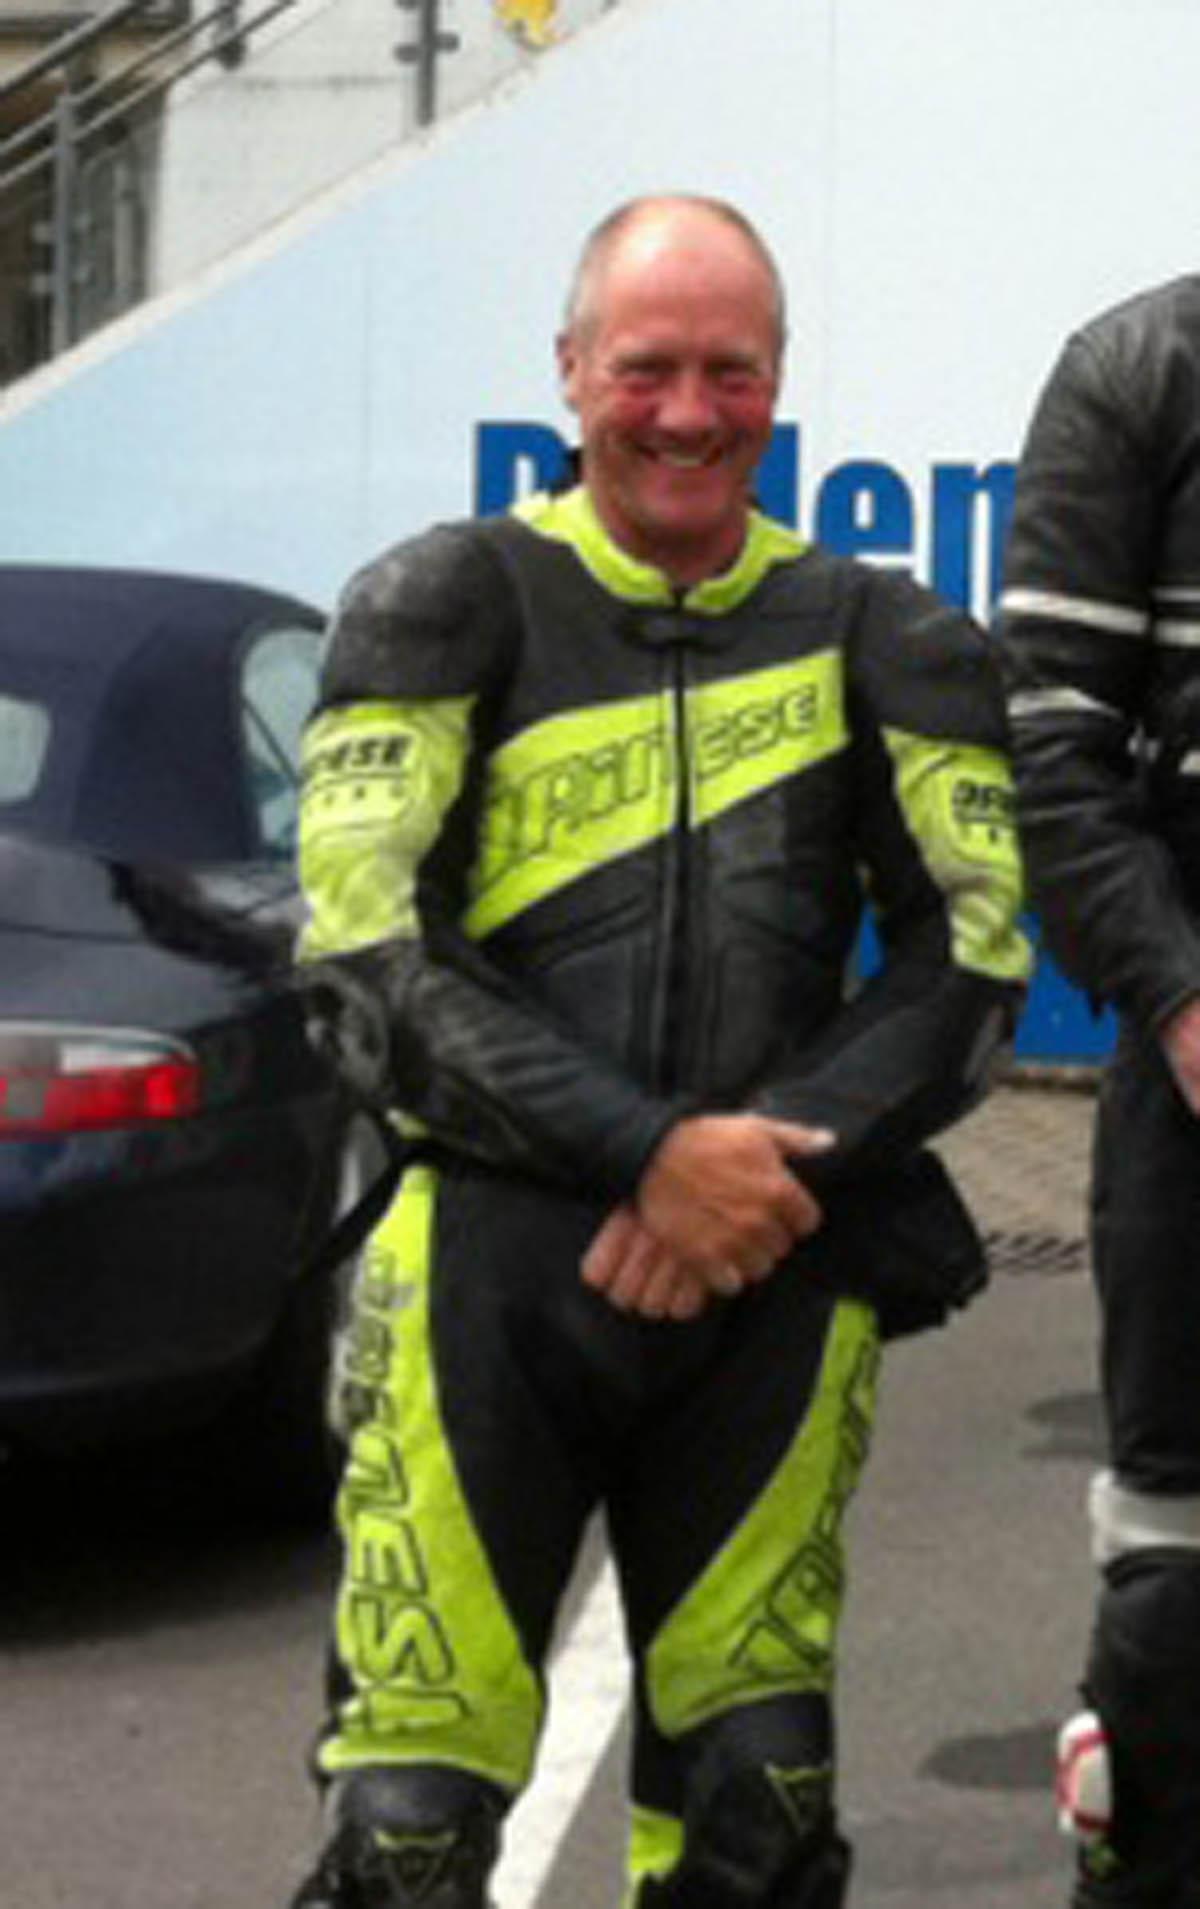 Michael Carson sadly died following the trackday incident at Oulton Park in 2013.